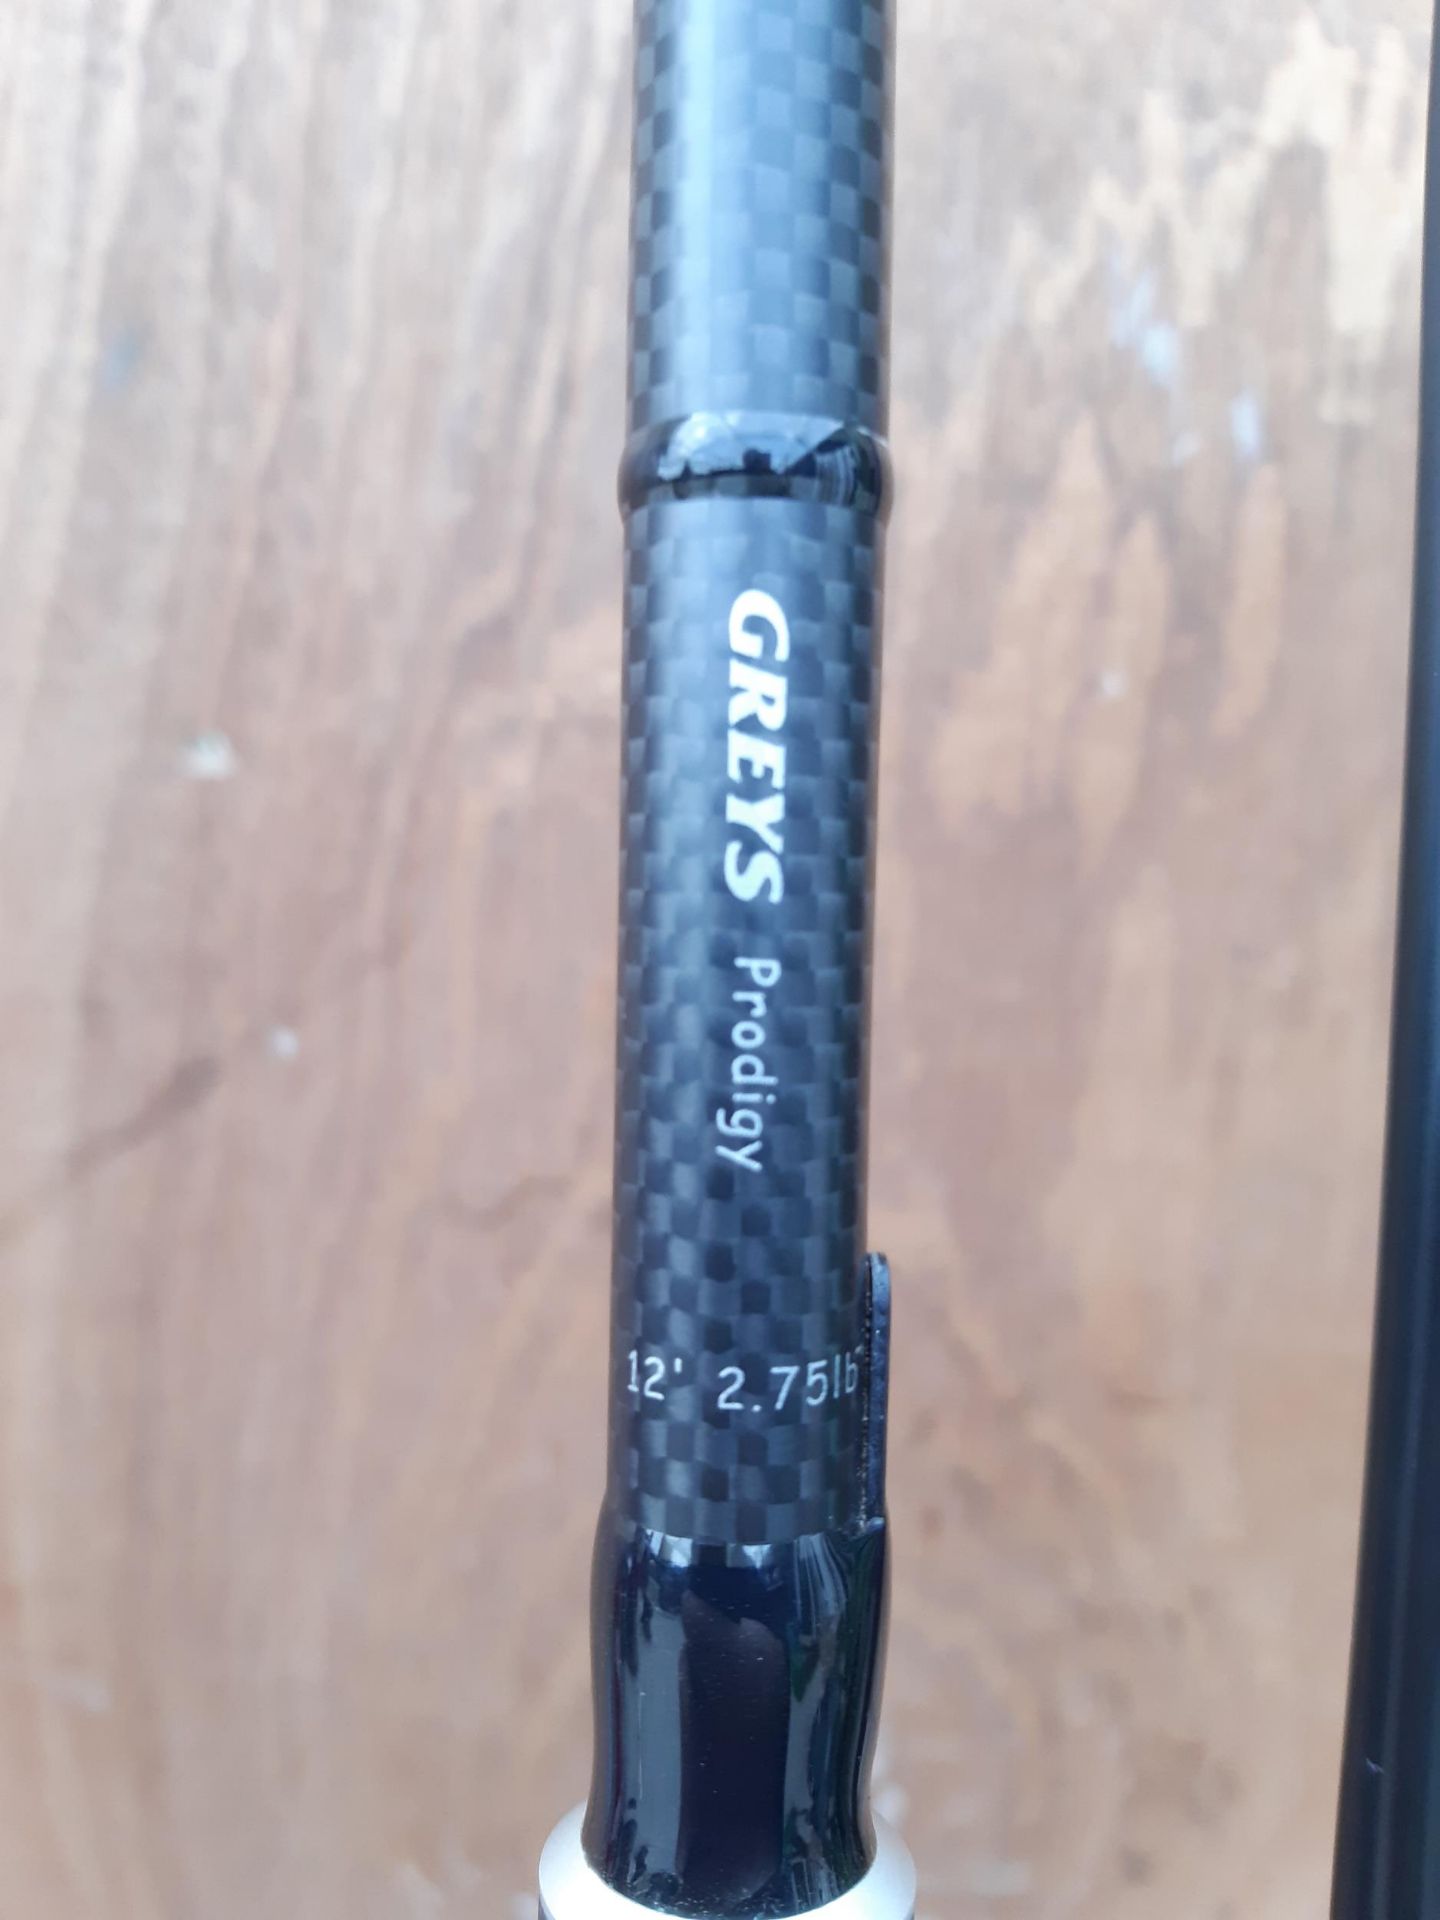 A 12FT 2.75LB GREYS PRODIGY CARP FISHING ROD. VENDOR STATES IT HAS ONLY BEEN USED TWICE - Image 6 of 8